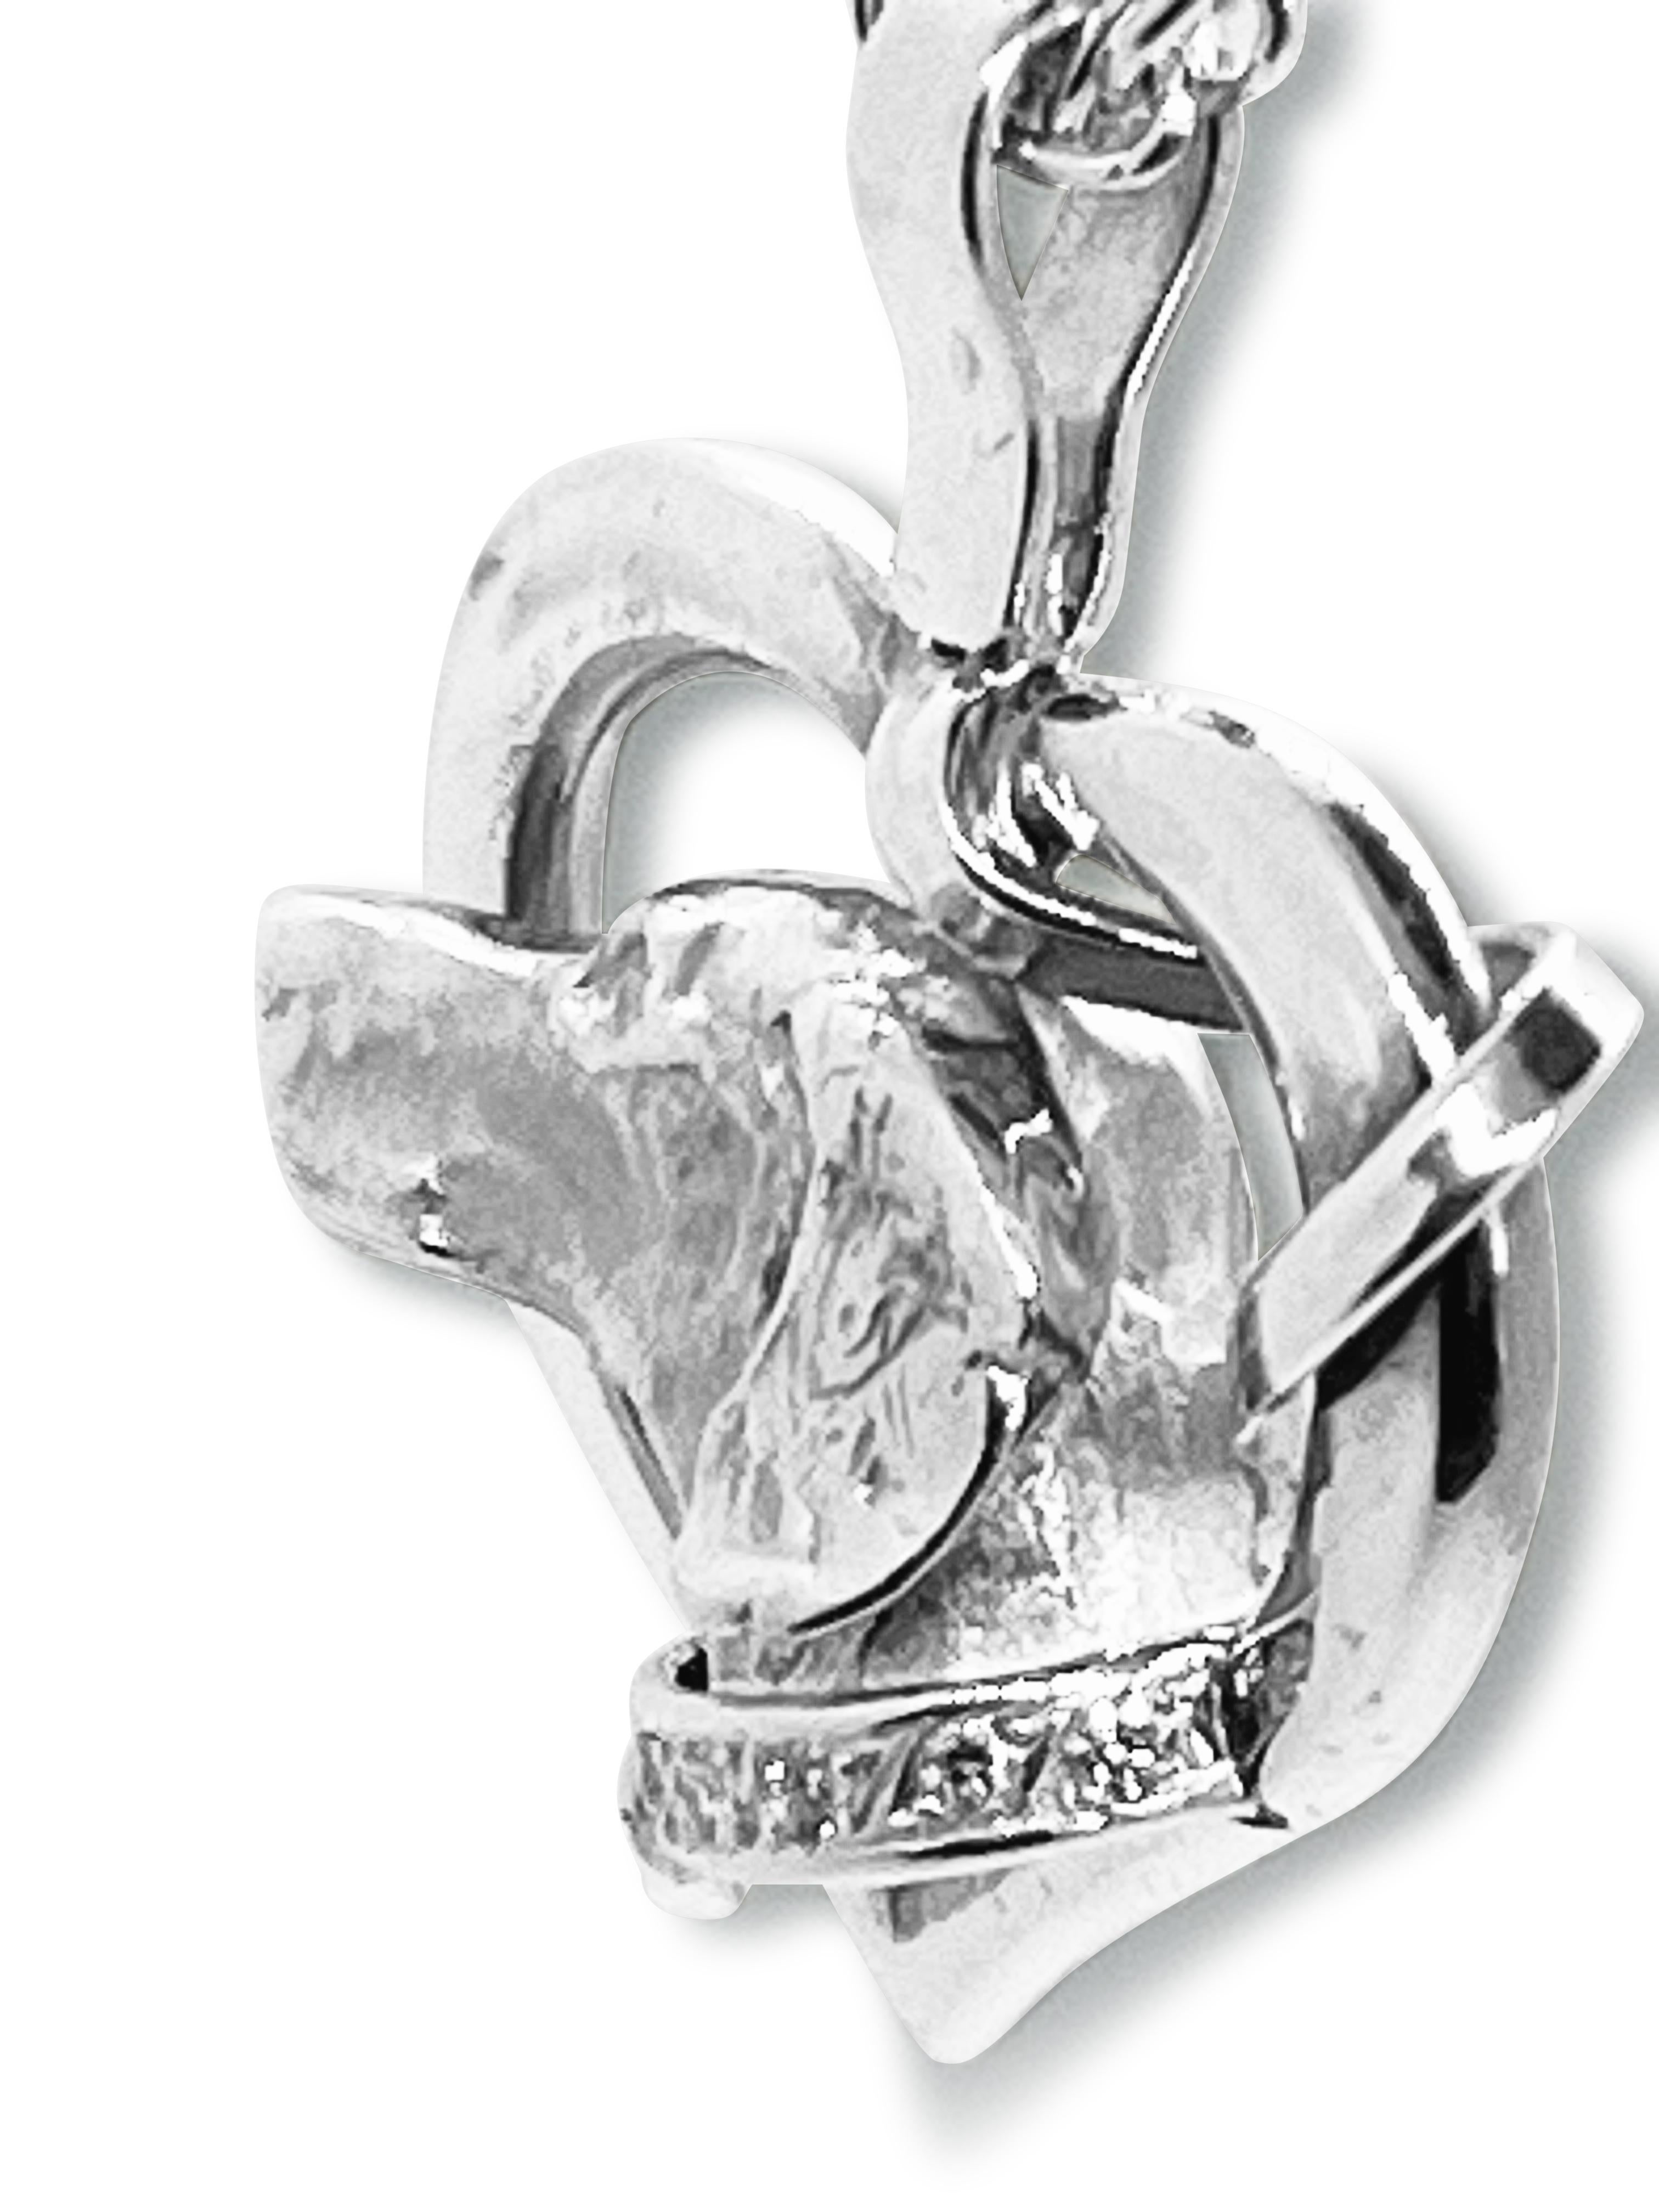  From Great Britain Paul Eaton VPRMS MAA sculpted a Labrador head with an elegant diamond set collar resting in a heart.  The pendant will be a jewelry piece you can wear close to your heart.  A perfect bespoke Labrador sculpture for the dog and